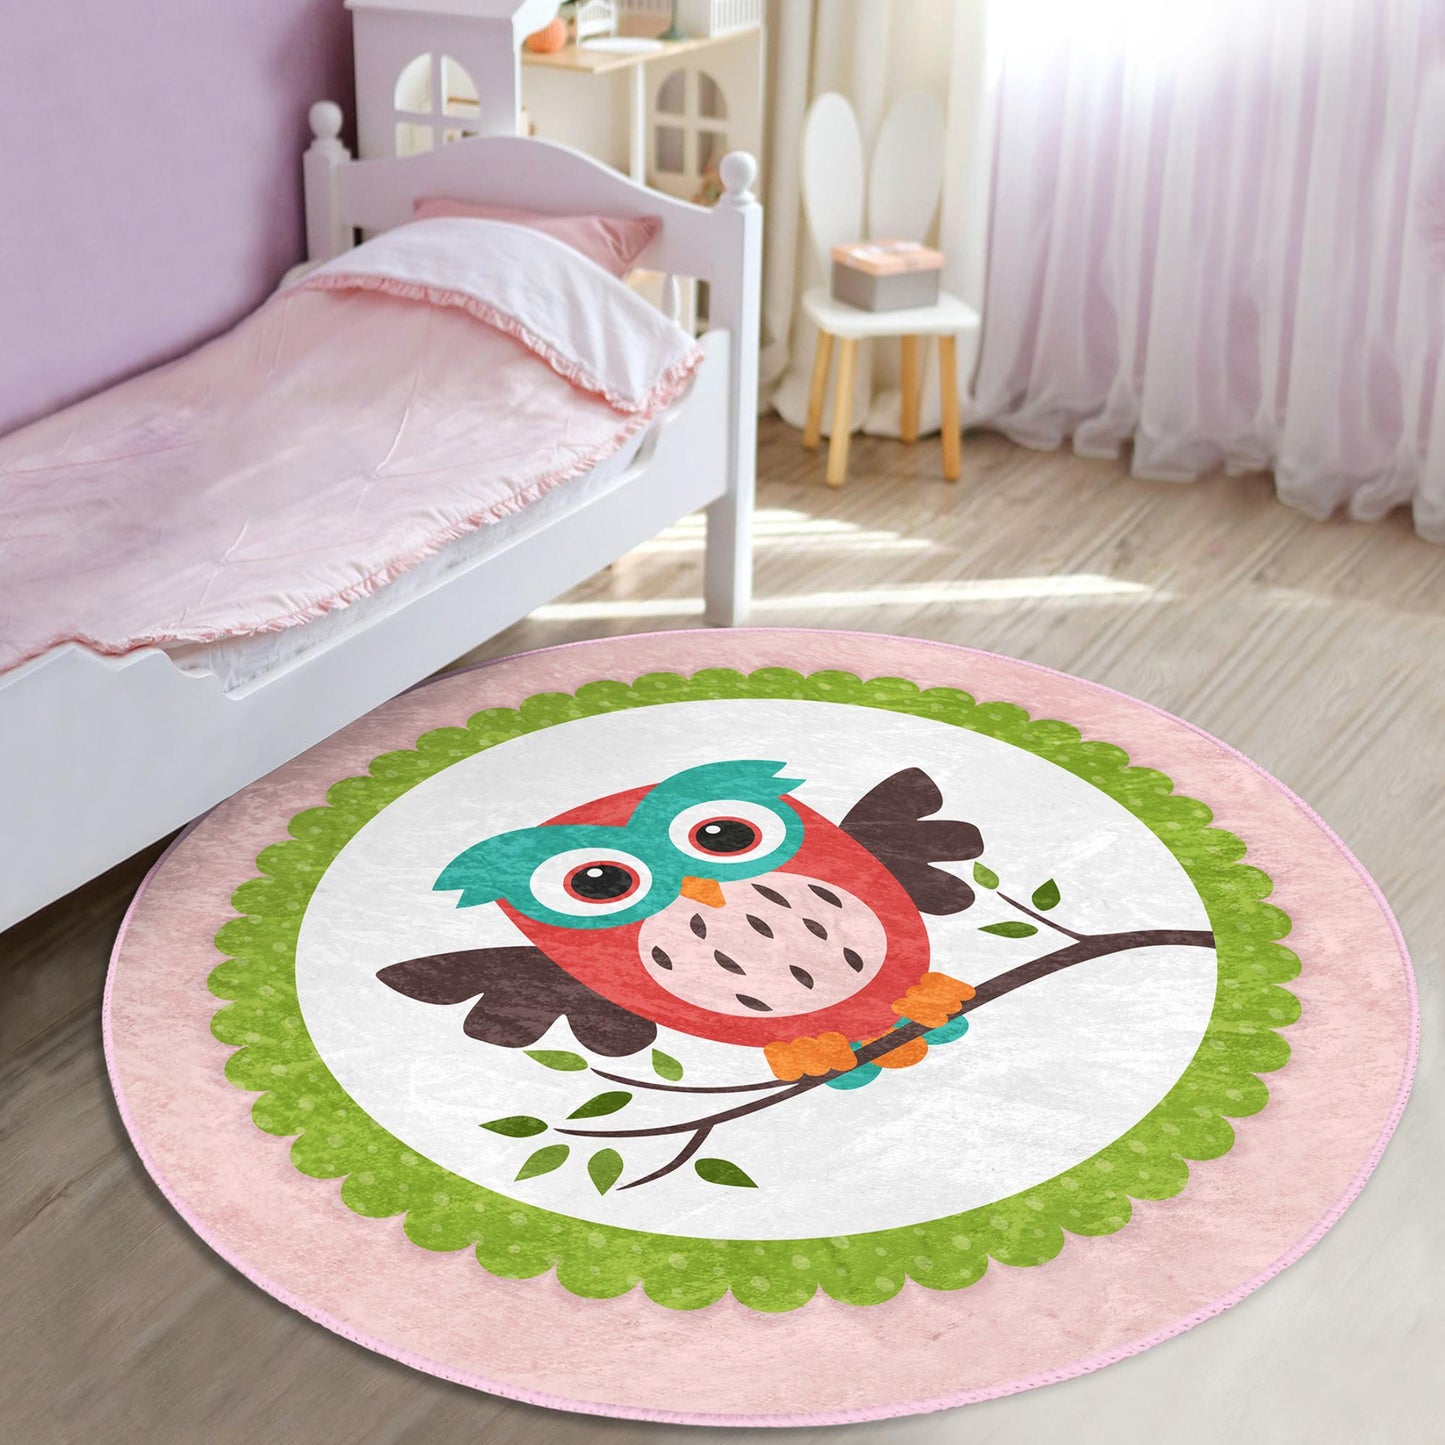 Soft and cozy rug adorned with cute baby owl designs for children's rooms.